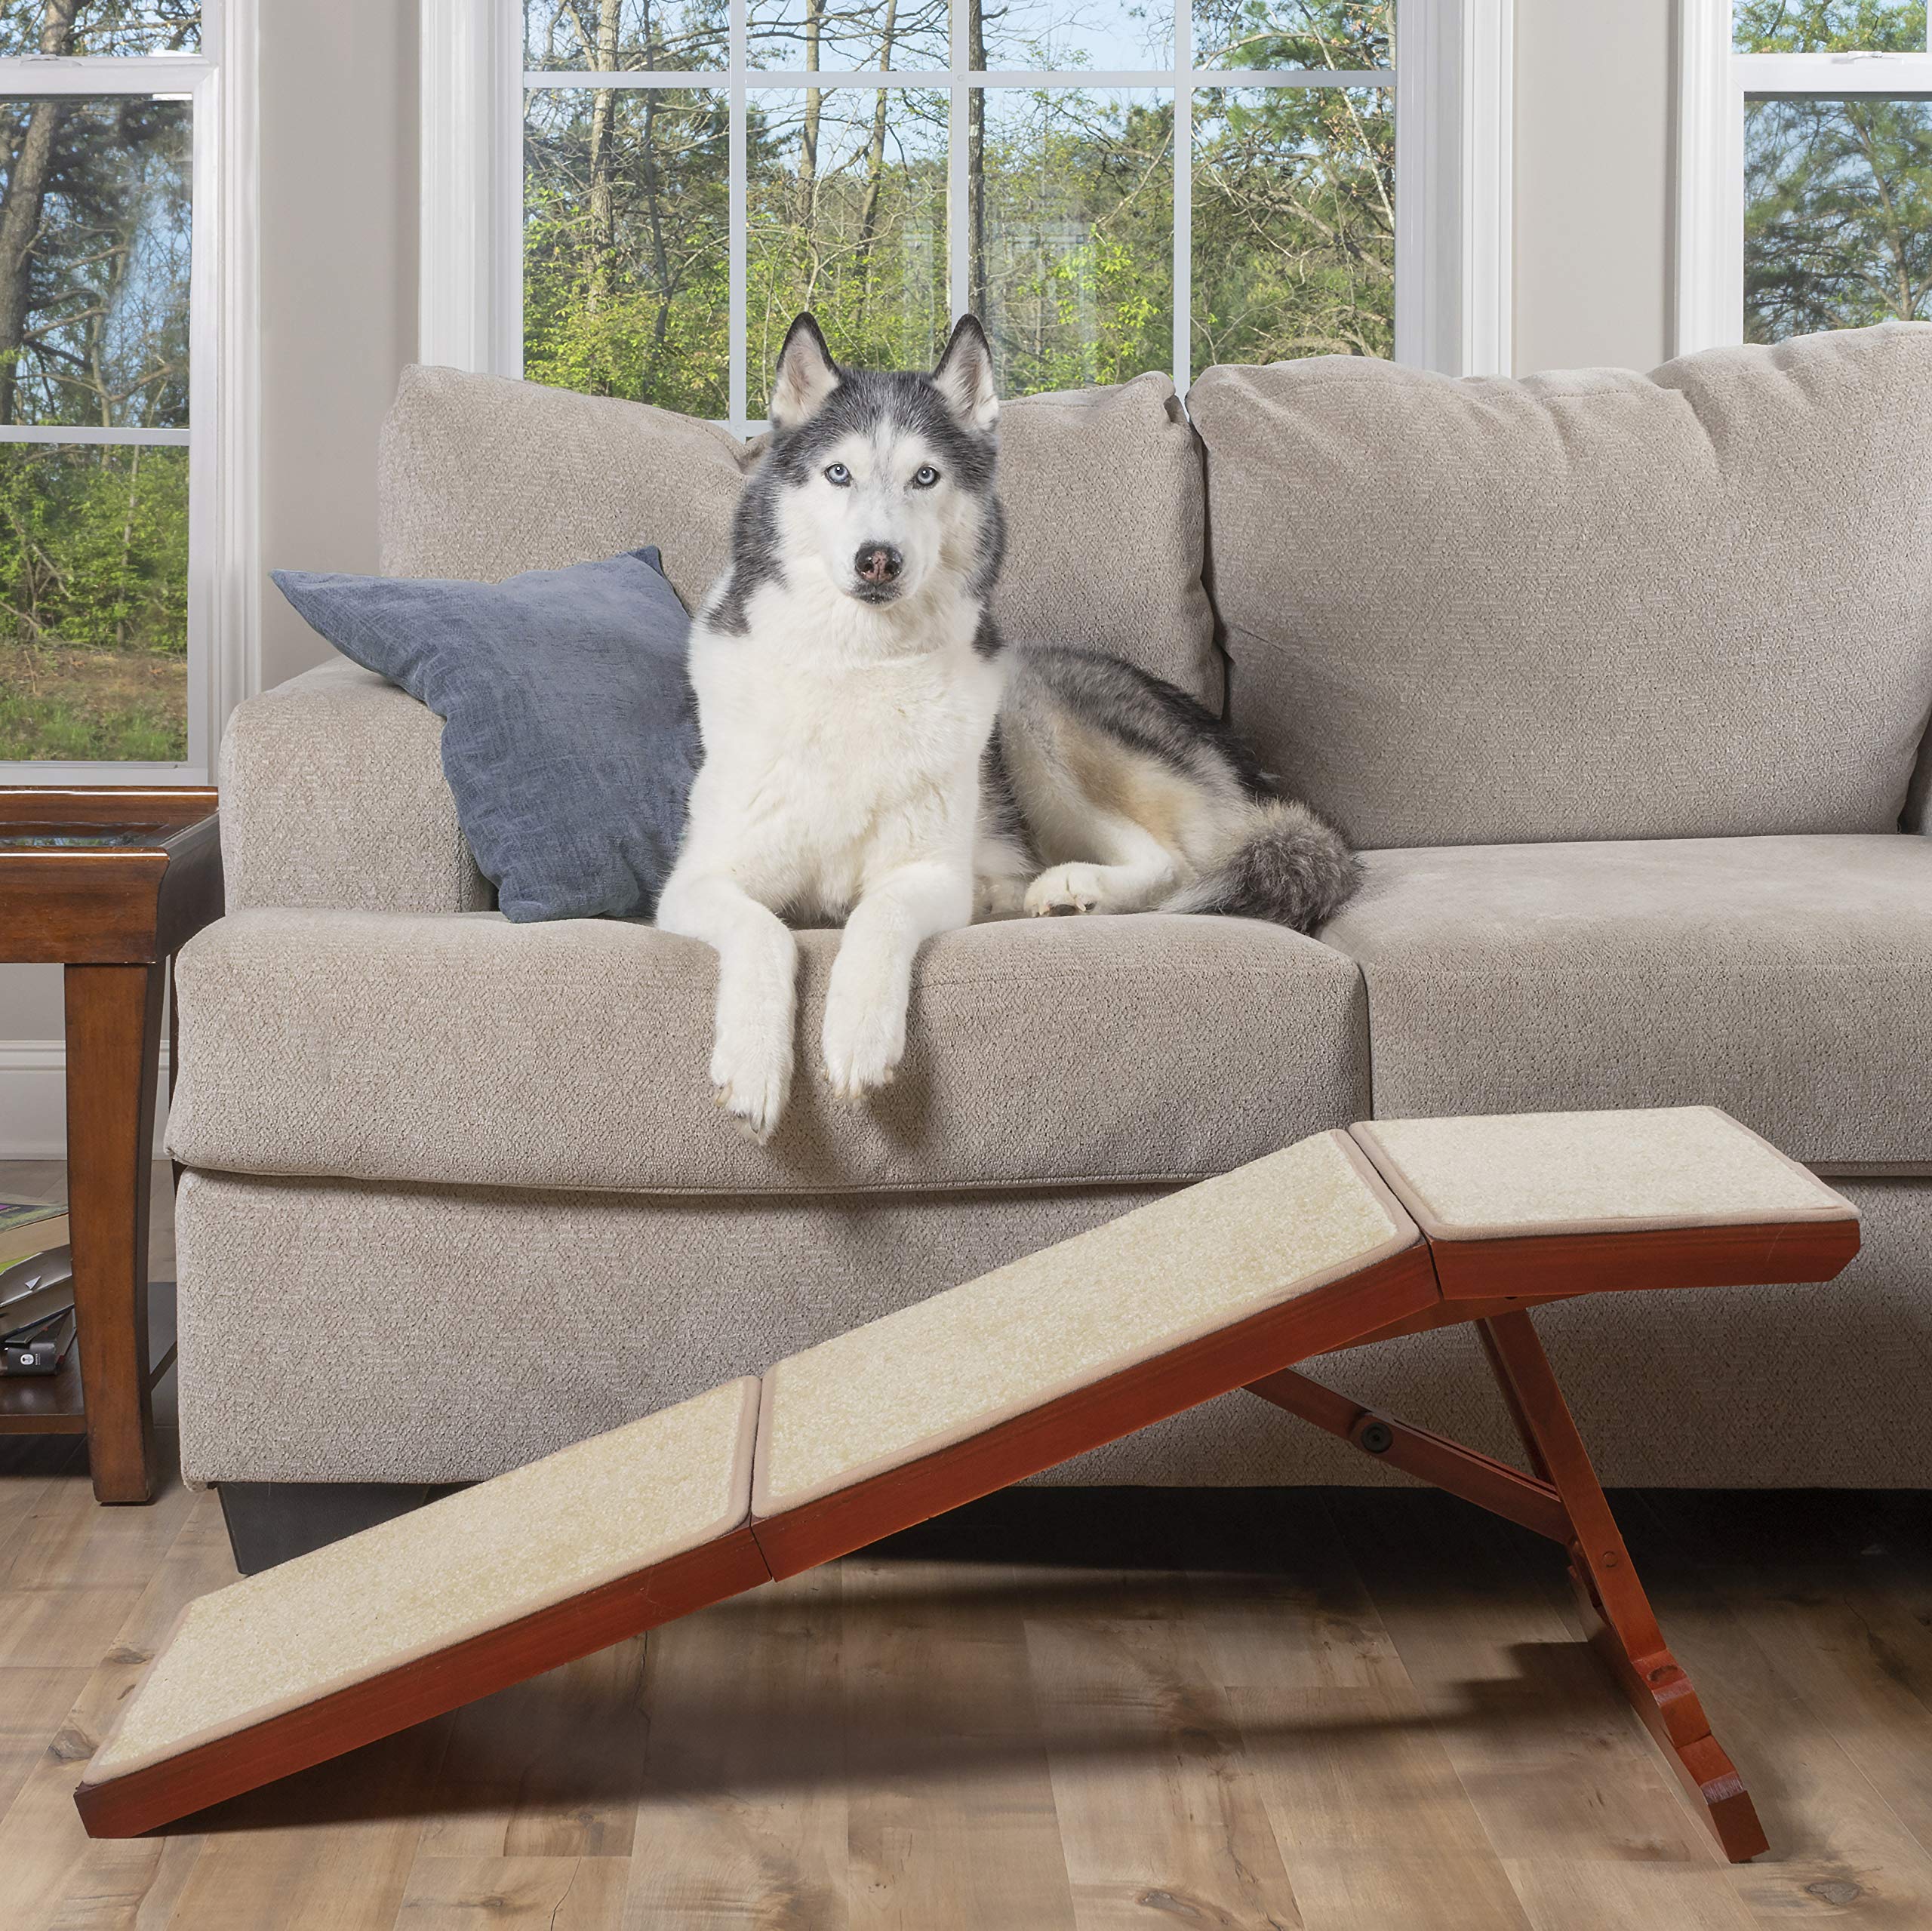 Durable Wooden Pet Ramp Holds up to 100 lb